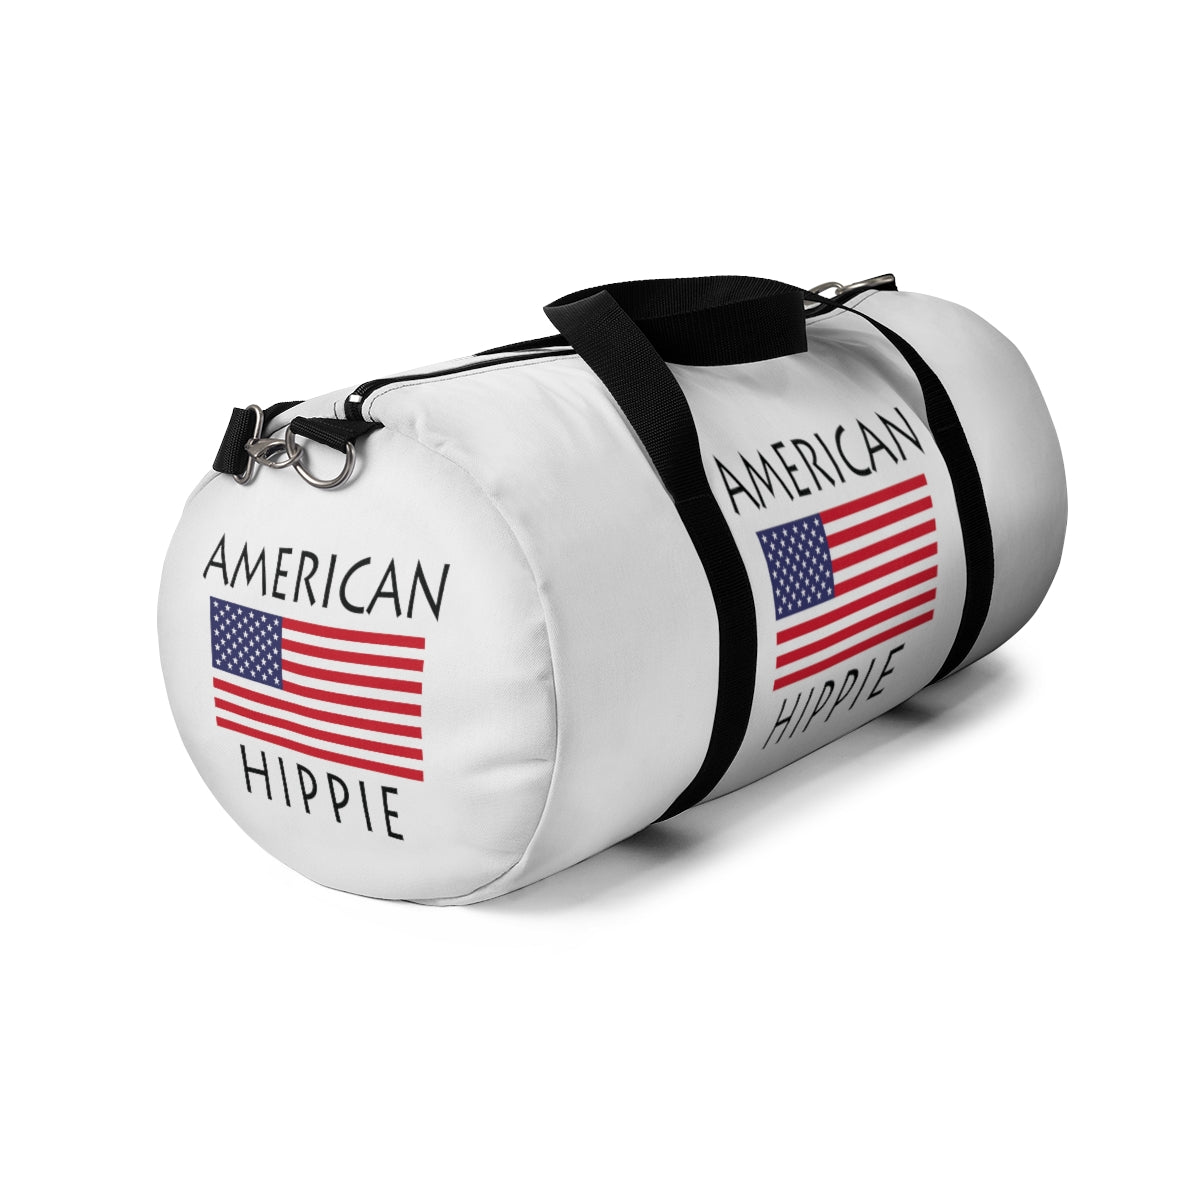 Stately Wear's American Flag Hippie duffel bag. We are a Katie Couric Shop partner. The perfect accessory as a beach bag, ski bag, travel bag & gym or yoga bag. Custom made one-at-a-time. 2 sizes to choose.